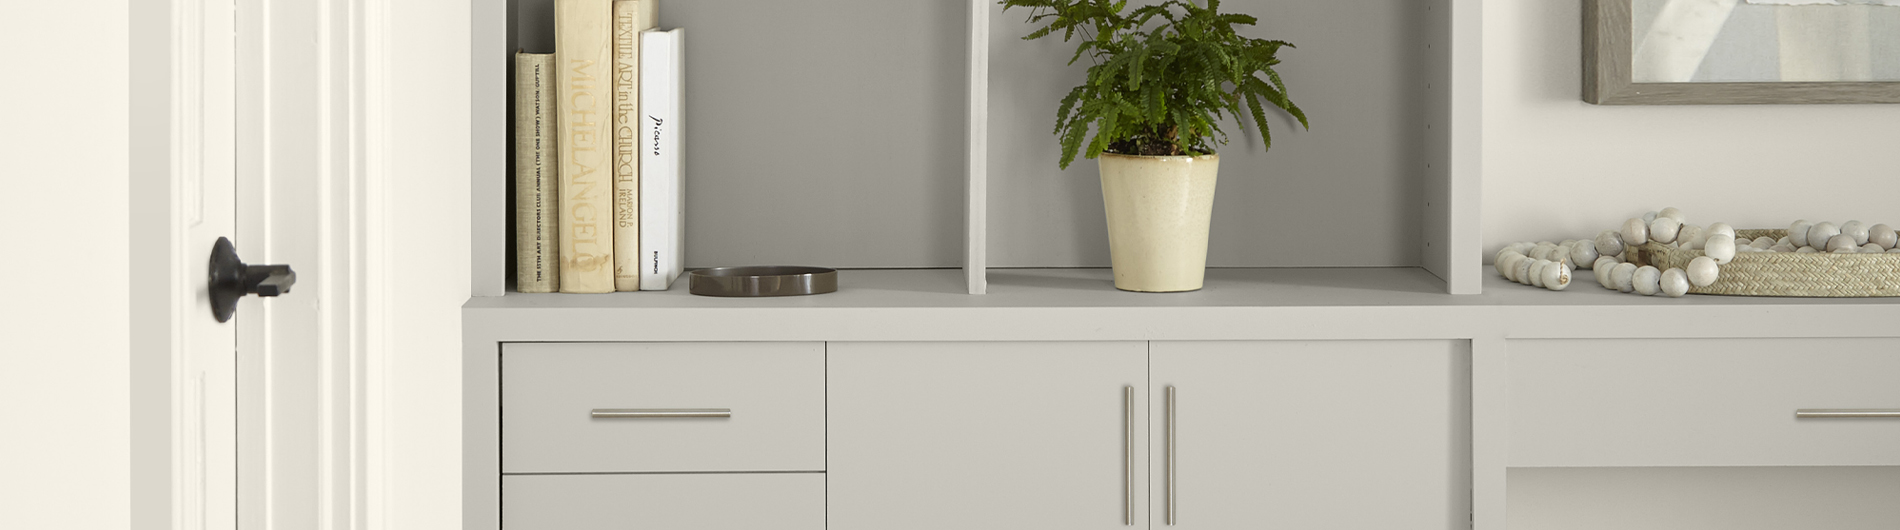 Built-in cabinet with open shelving painting in the color Gratifying Gray.